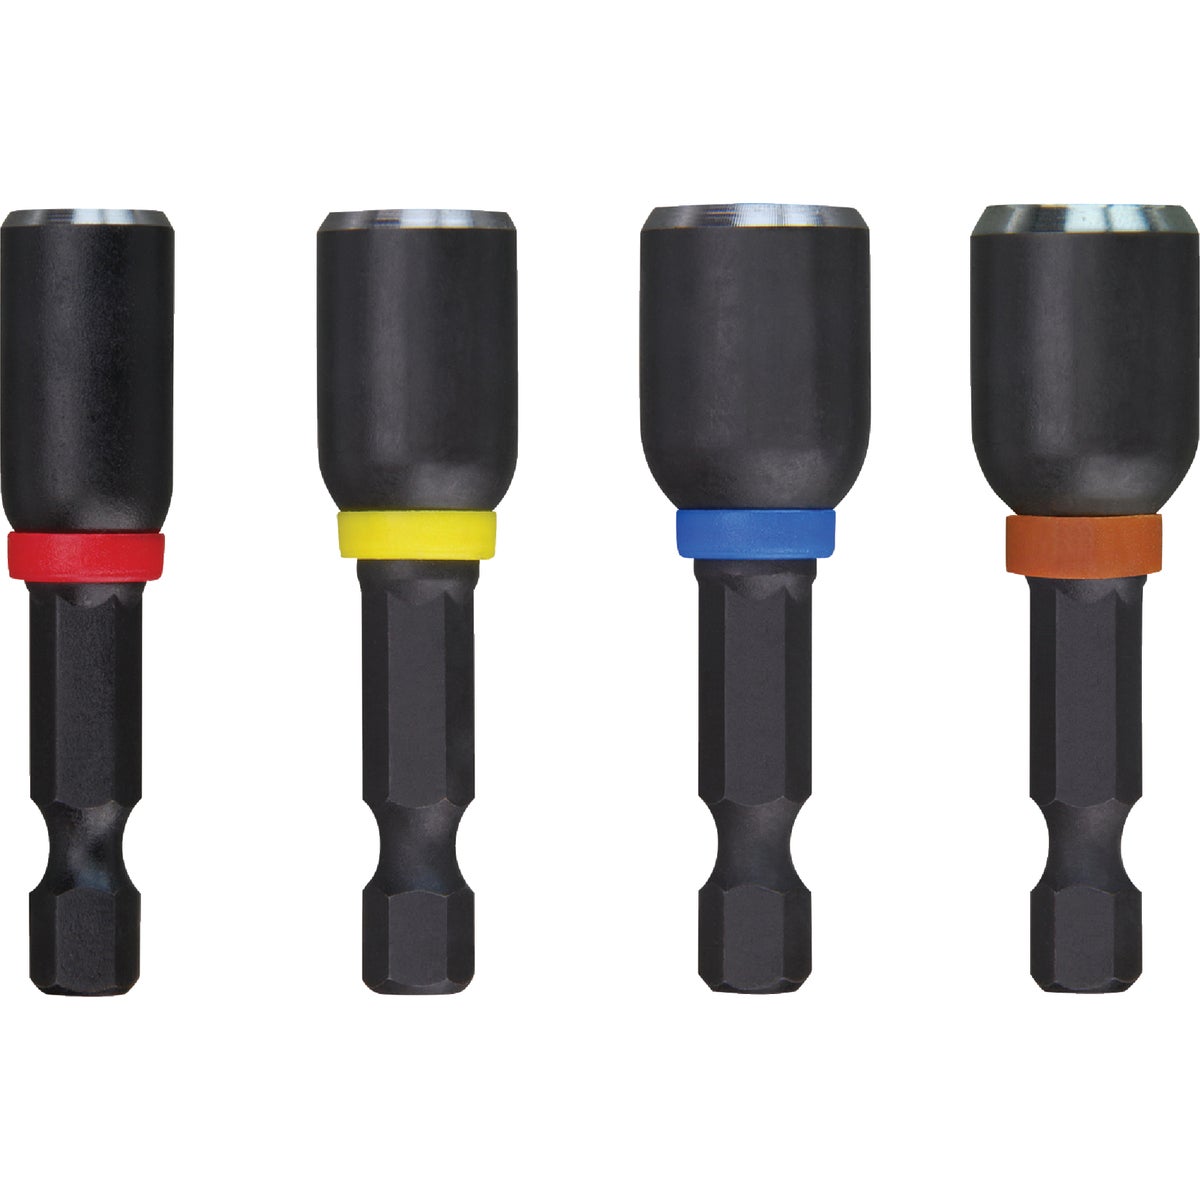 Item 355877, Milwaukee Shockwave Impact Duty magnetic nut drivers are engineered for 